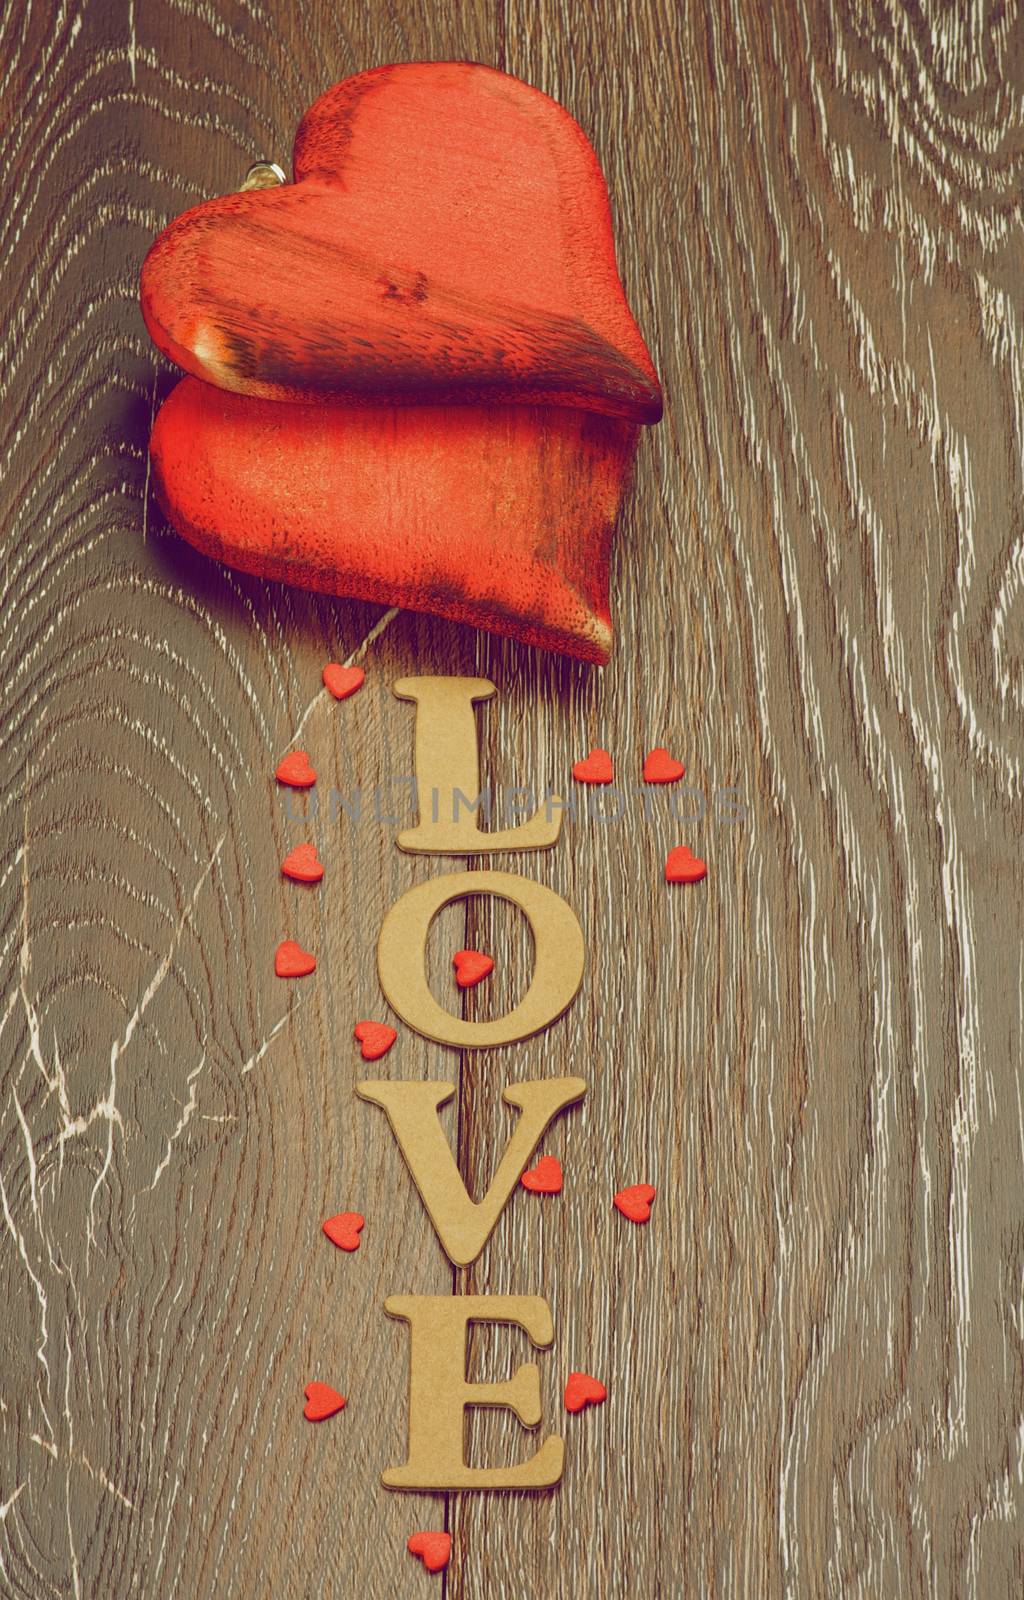 Two Wooden Red Hearts and Cardboard Word Love isolated on Dark Hardwood background. Retro Styled